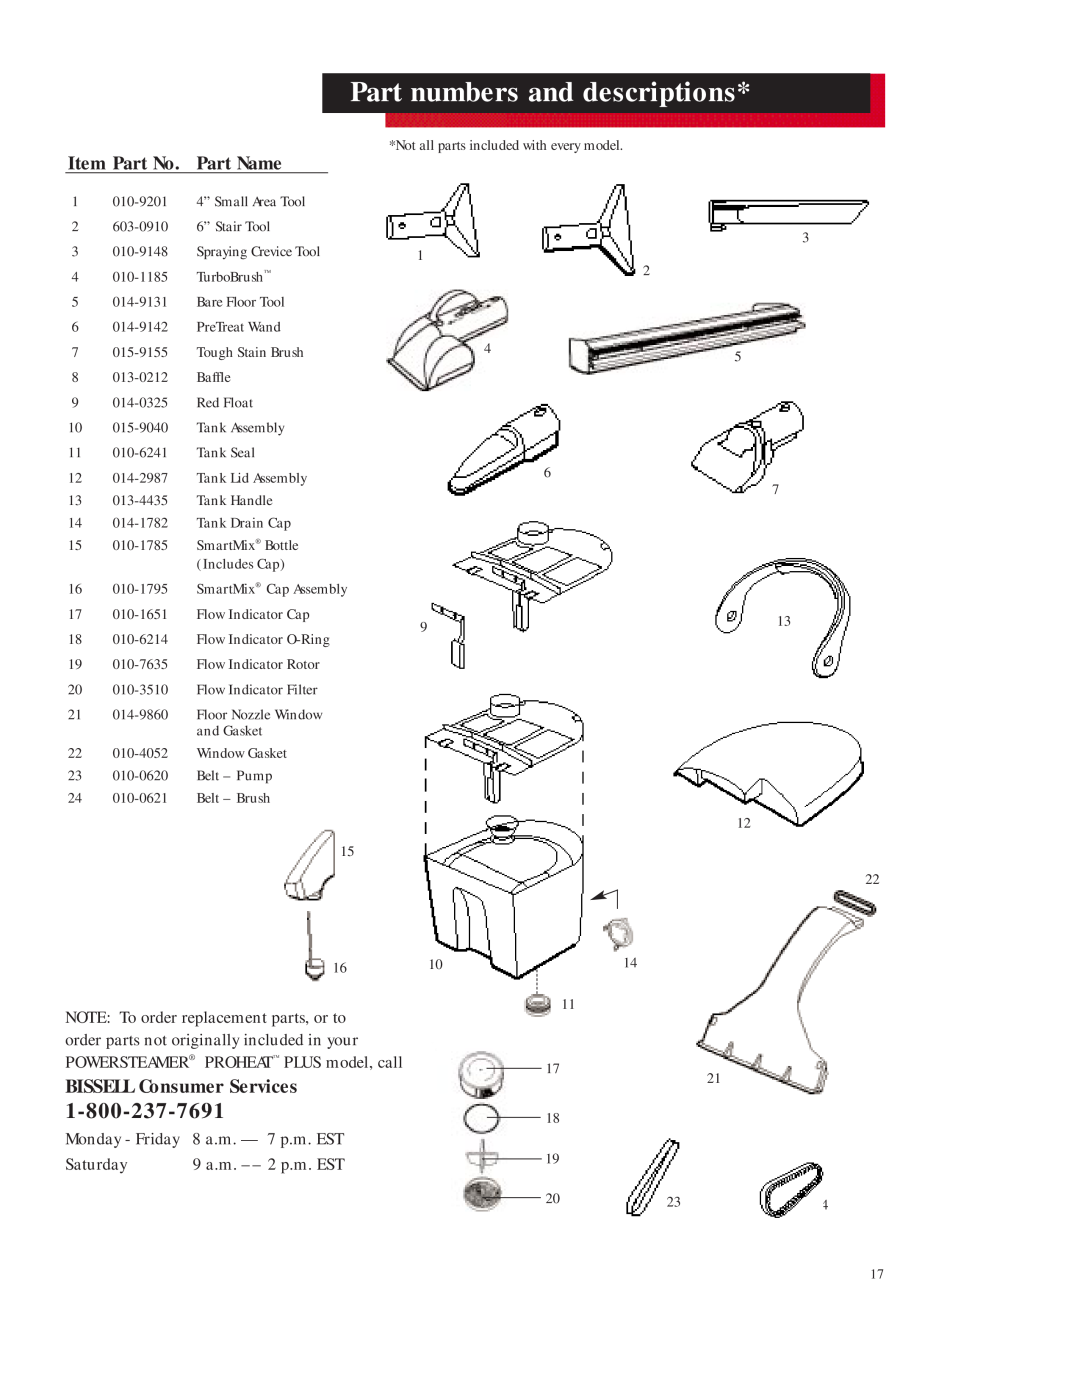 Bissell 16981 warranty Part numbers and descriptions, Item Part No. Part Name, BISSELL Consumer Services 